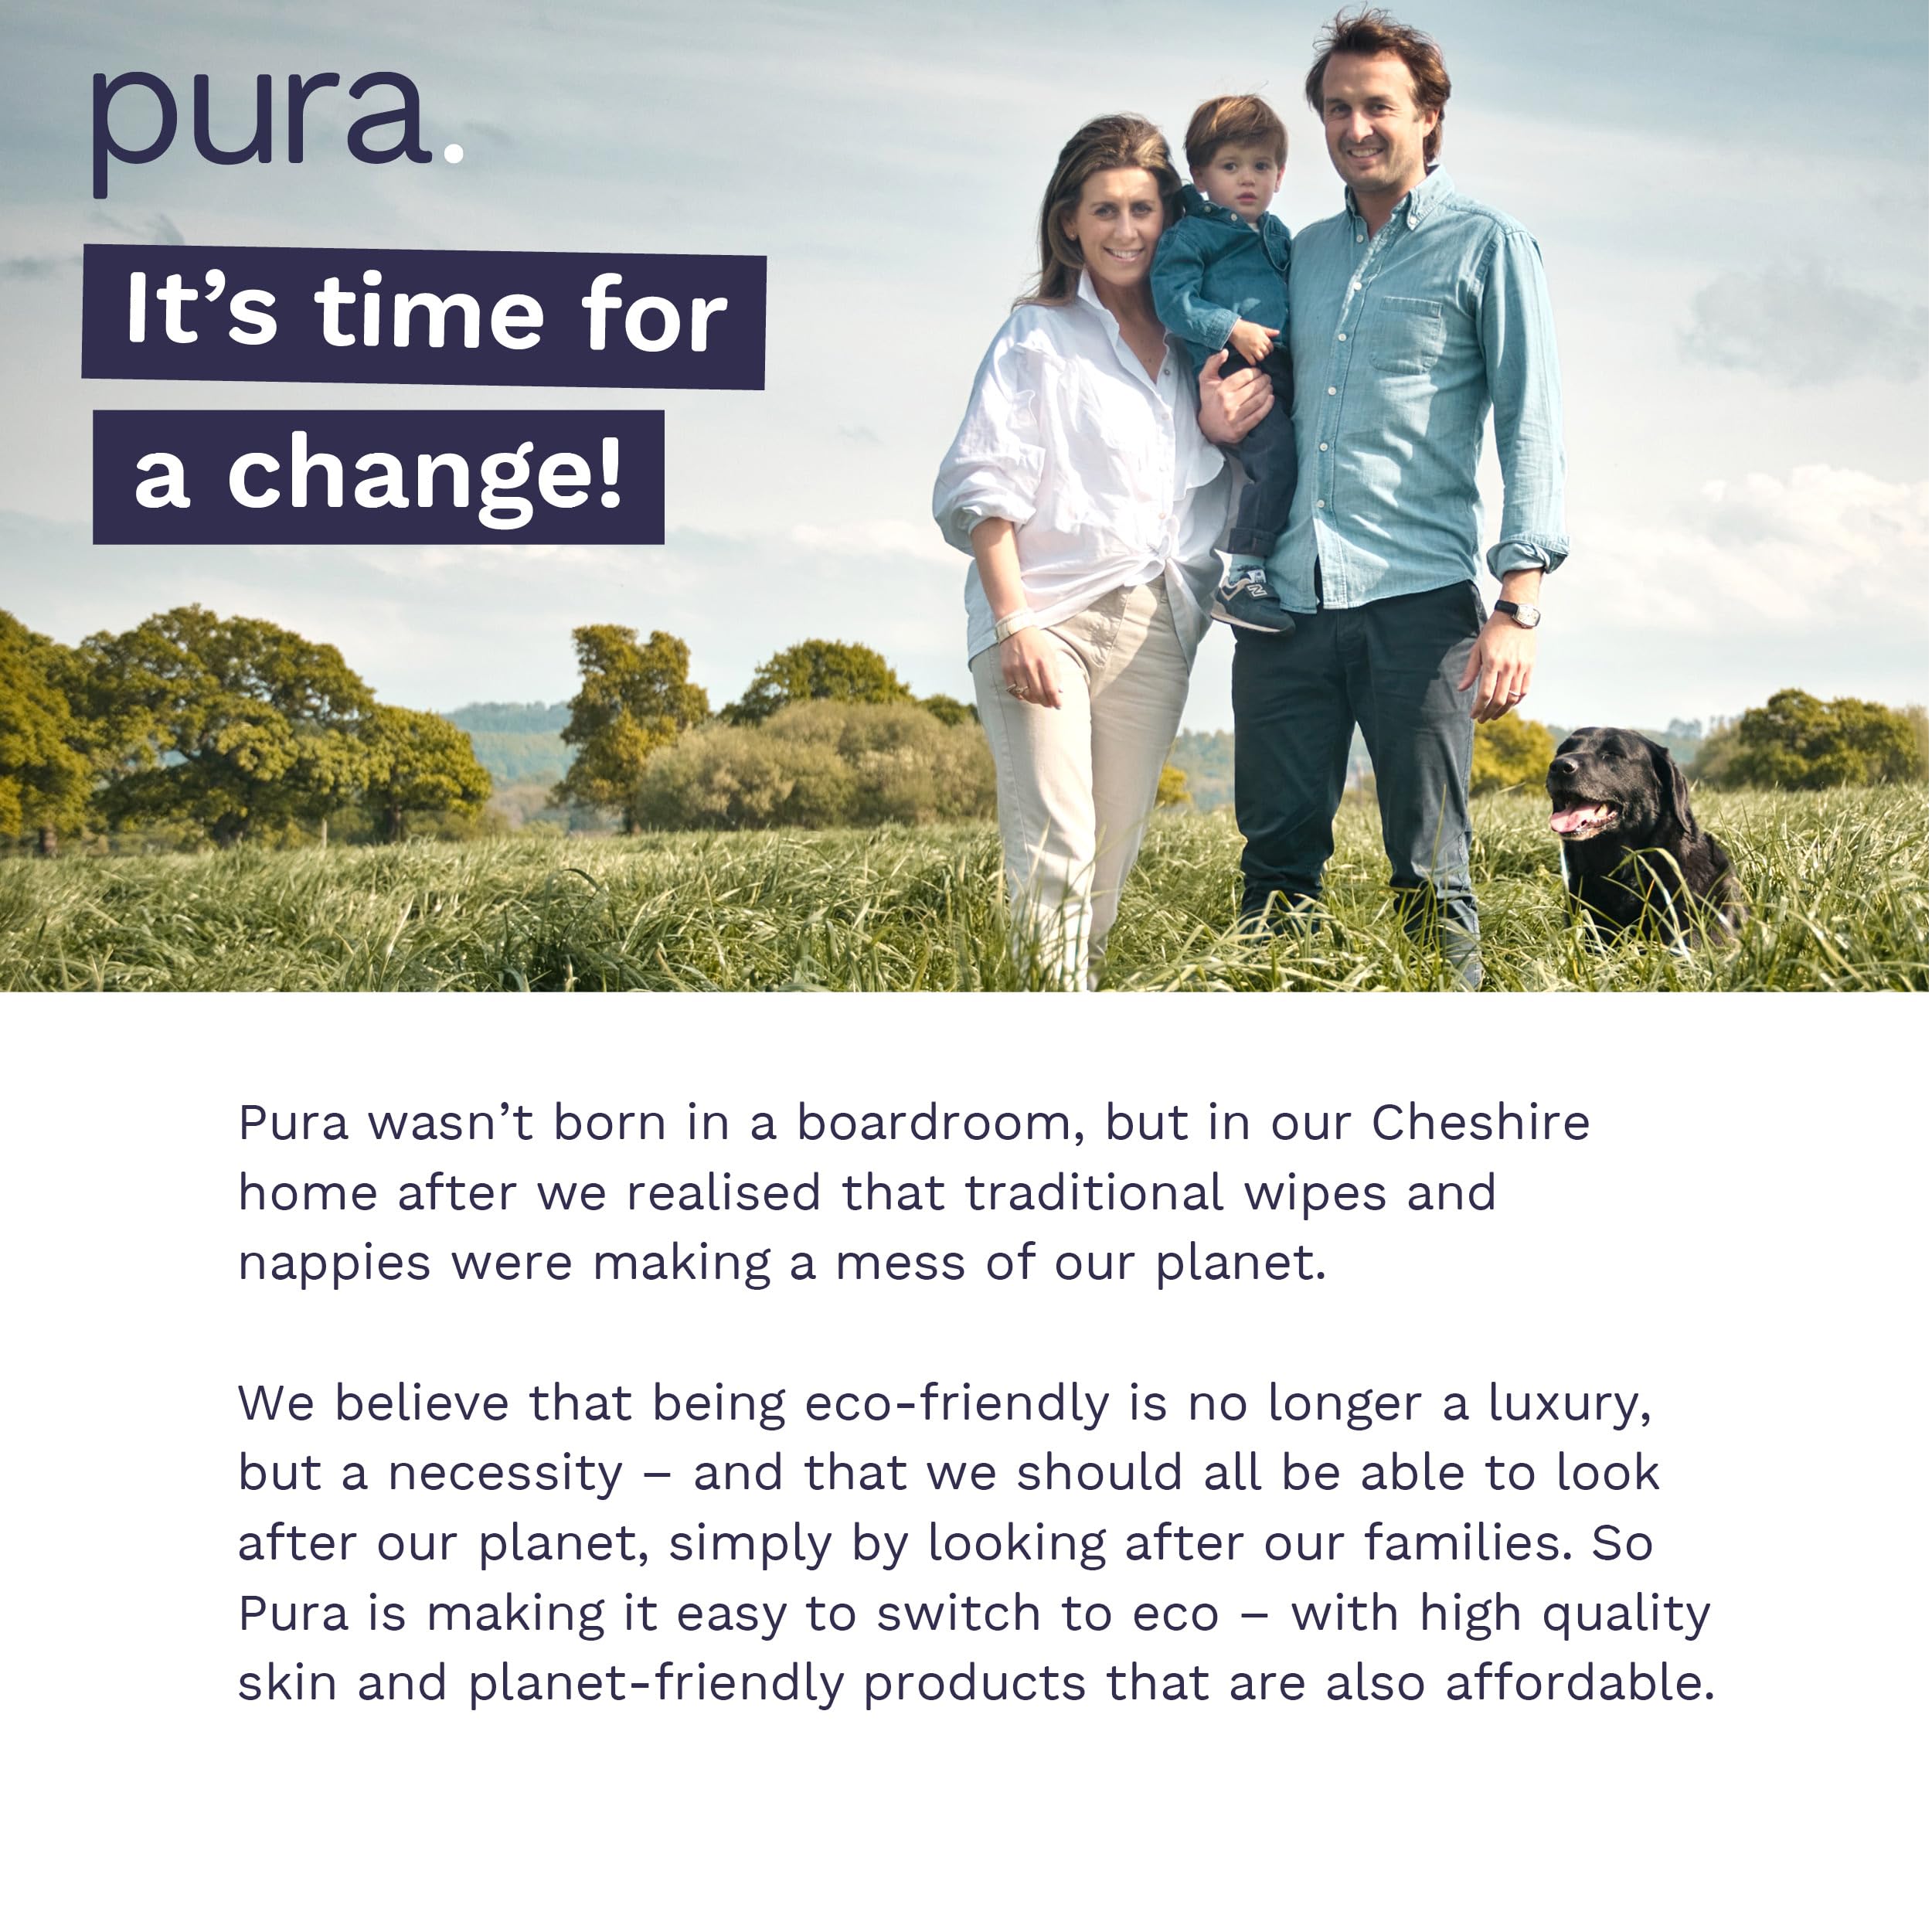 Pura Size 6 Eco-Friendly Diapers (29+ lbs) Hypoallergenic, Soft Organic Cotton, Sustainable, up to 12 Hours Leak Protection, Allergy UK, Recyclable Paper Packaging, 6 Packs of 18 (108 Diapers)